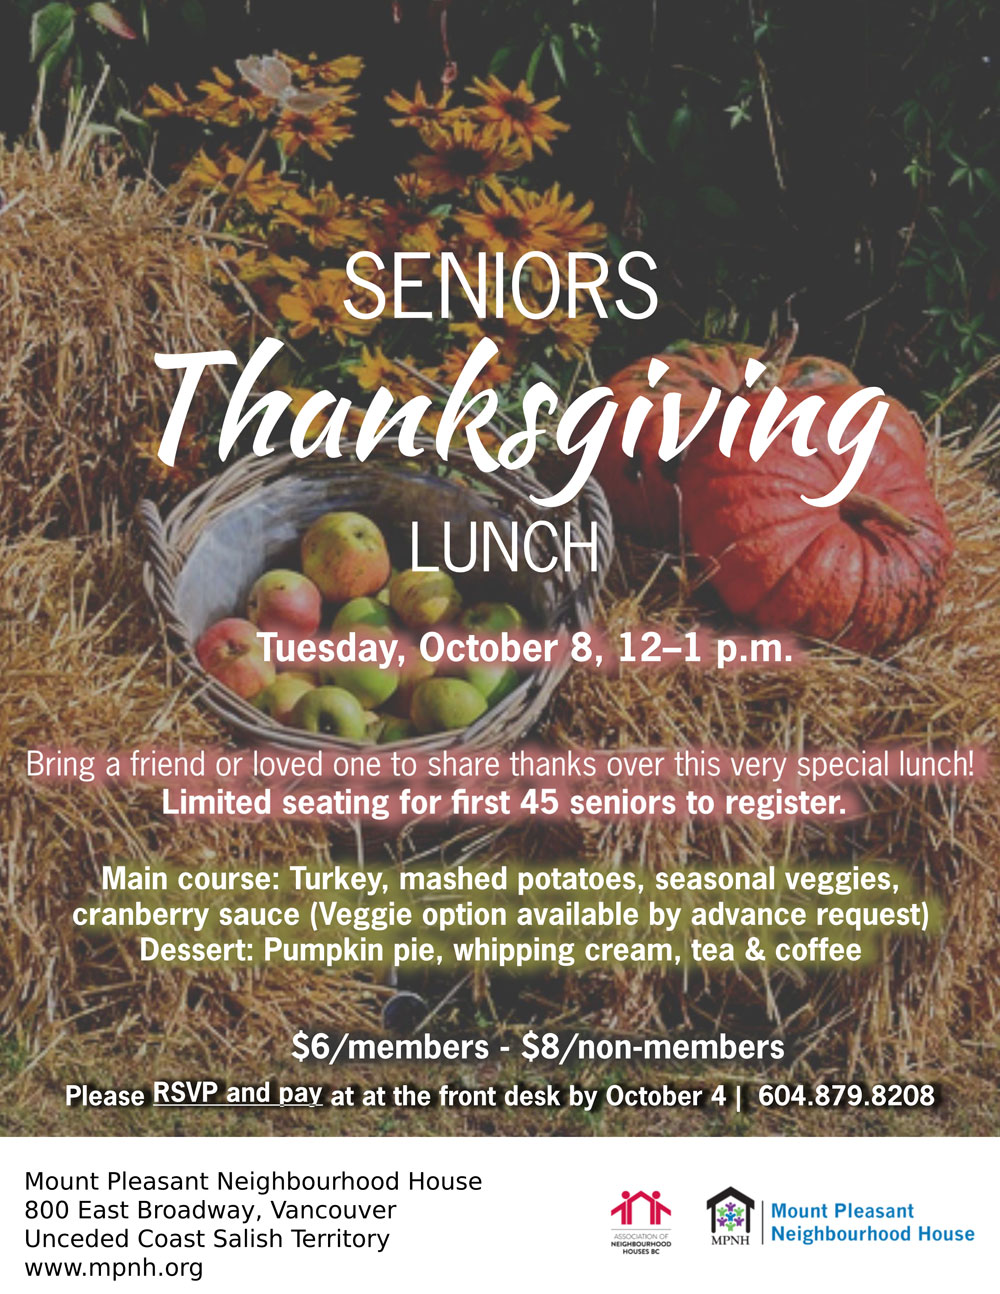 An image of the event poster, featuring a background photo of bales of hay, sunflowers, a basket of apples, and two gourds